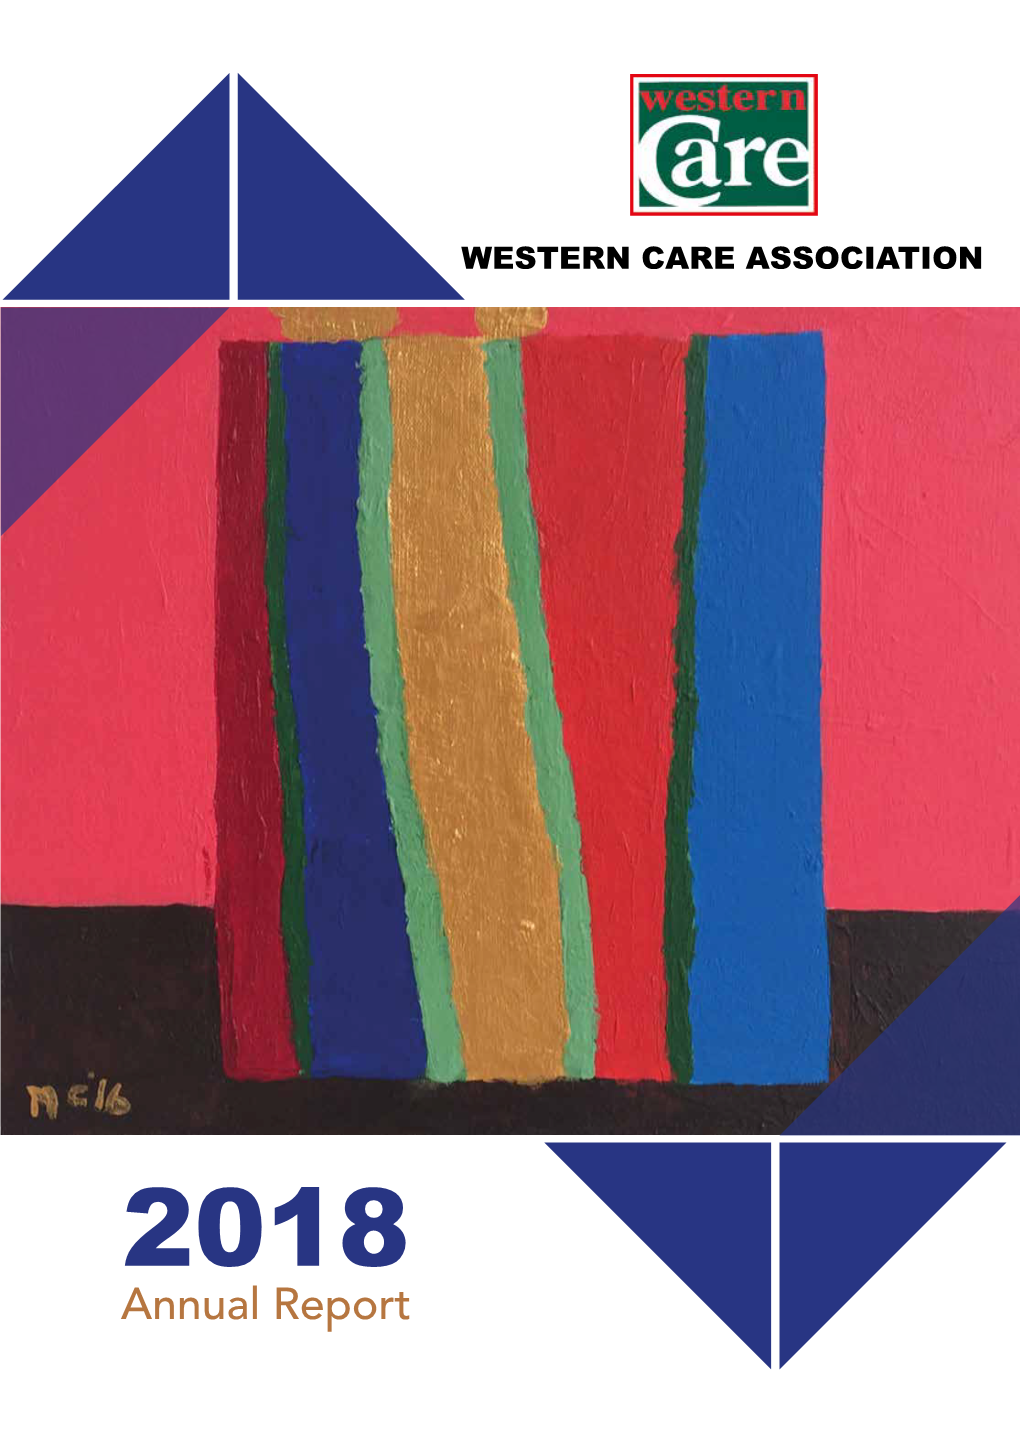 Western Care Association Annual Report 2018